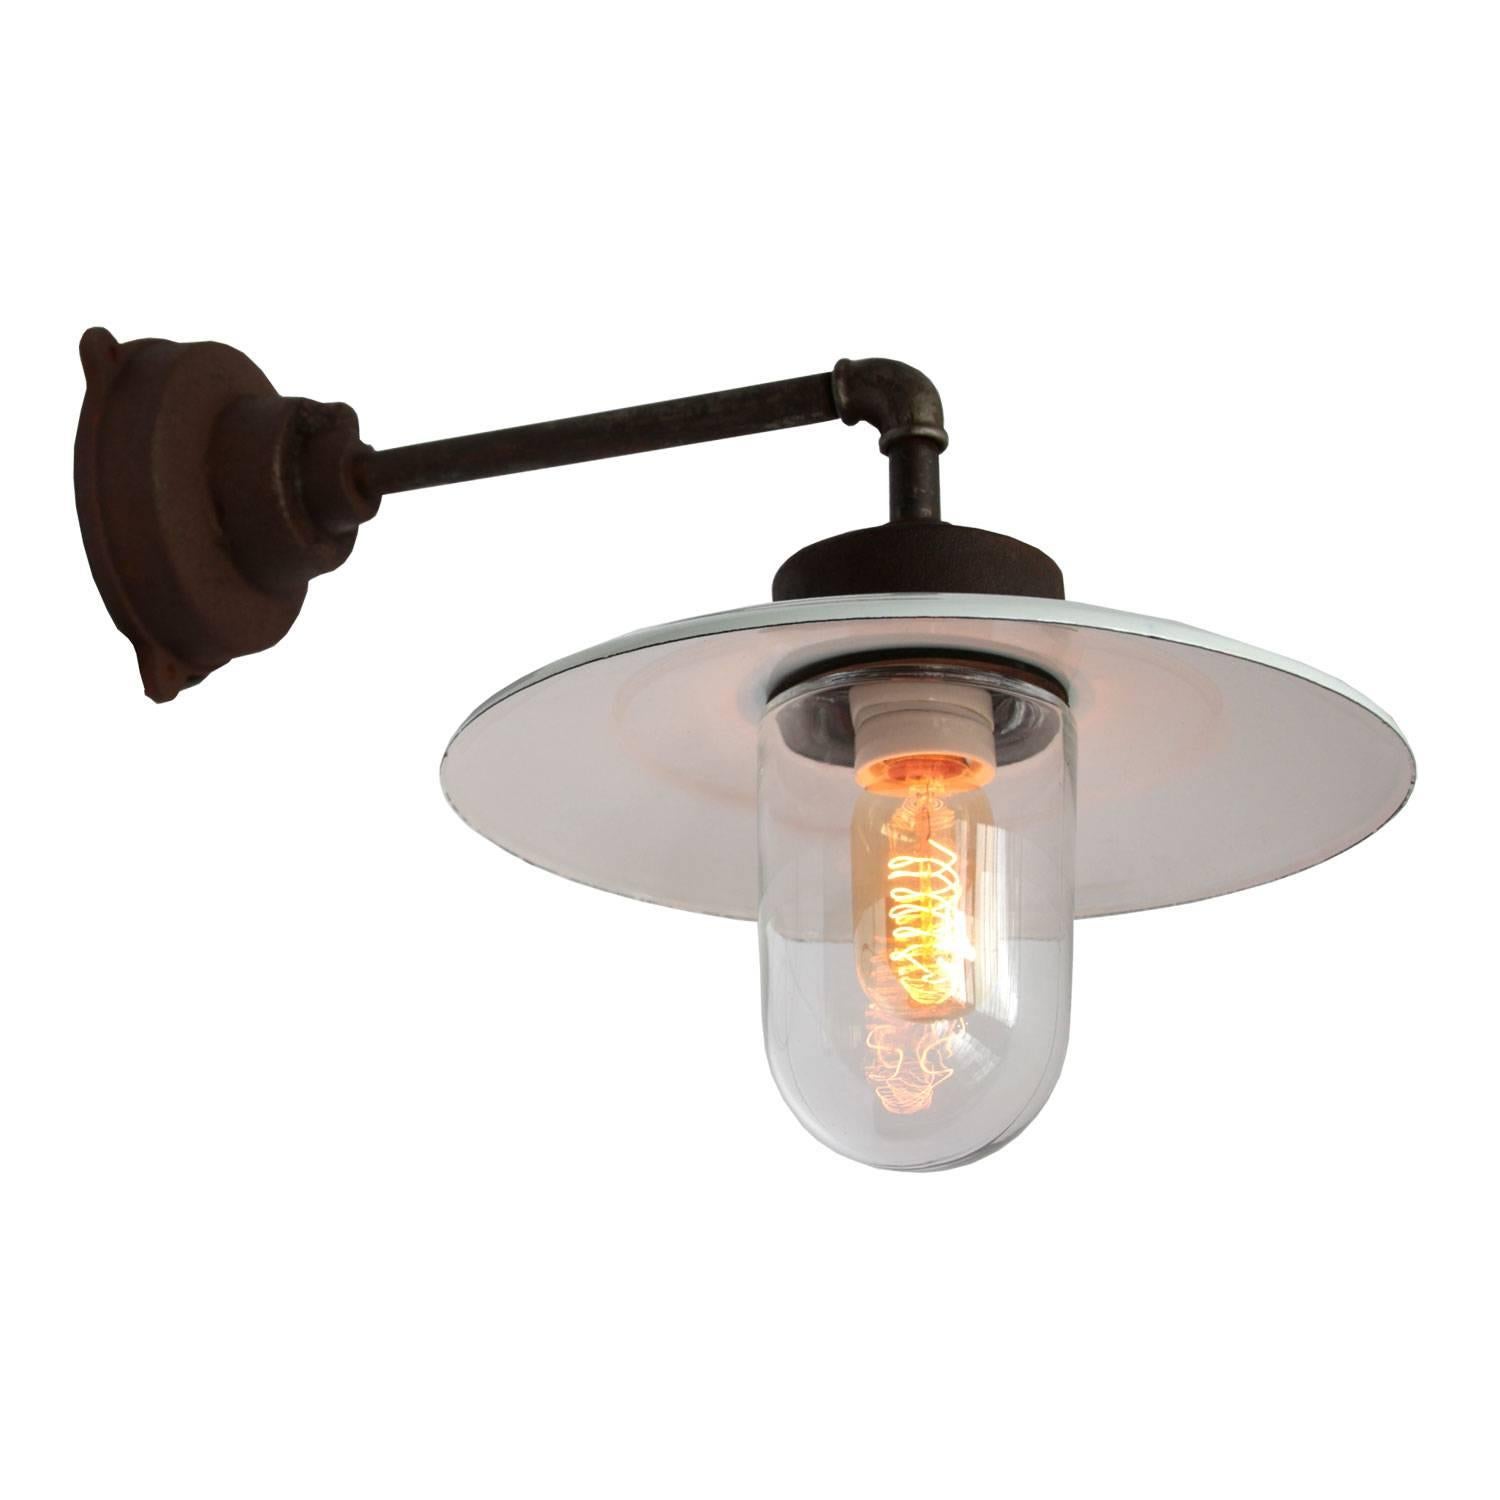 Muran wall s. White enamel Industrial wall light. Clear glass.
Diameter cast iron wall piece: 12 cm. 3 holes to secure.

Weight: 5.5 kg / 12.1 lb

All lamps have been made suitable by international standards for incandescent light bulbs,